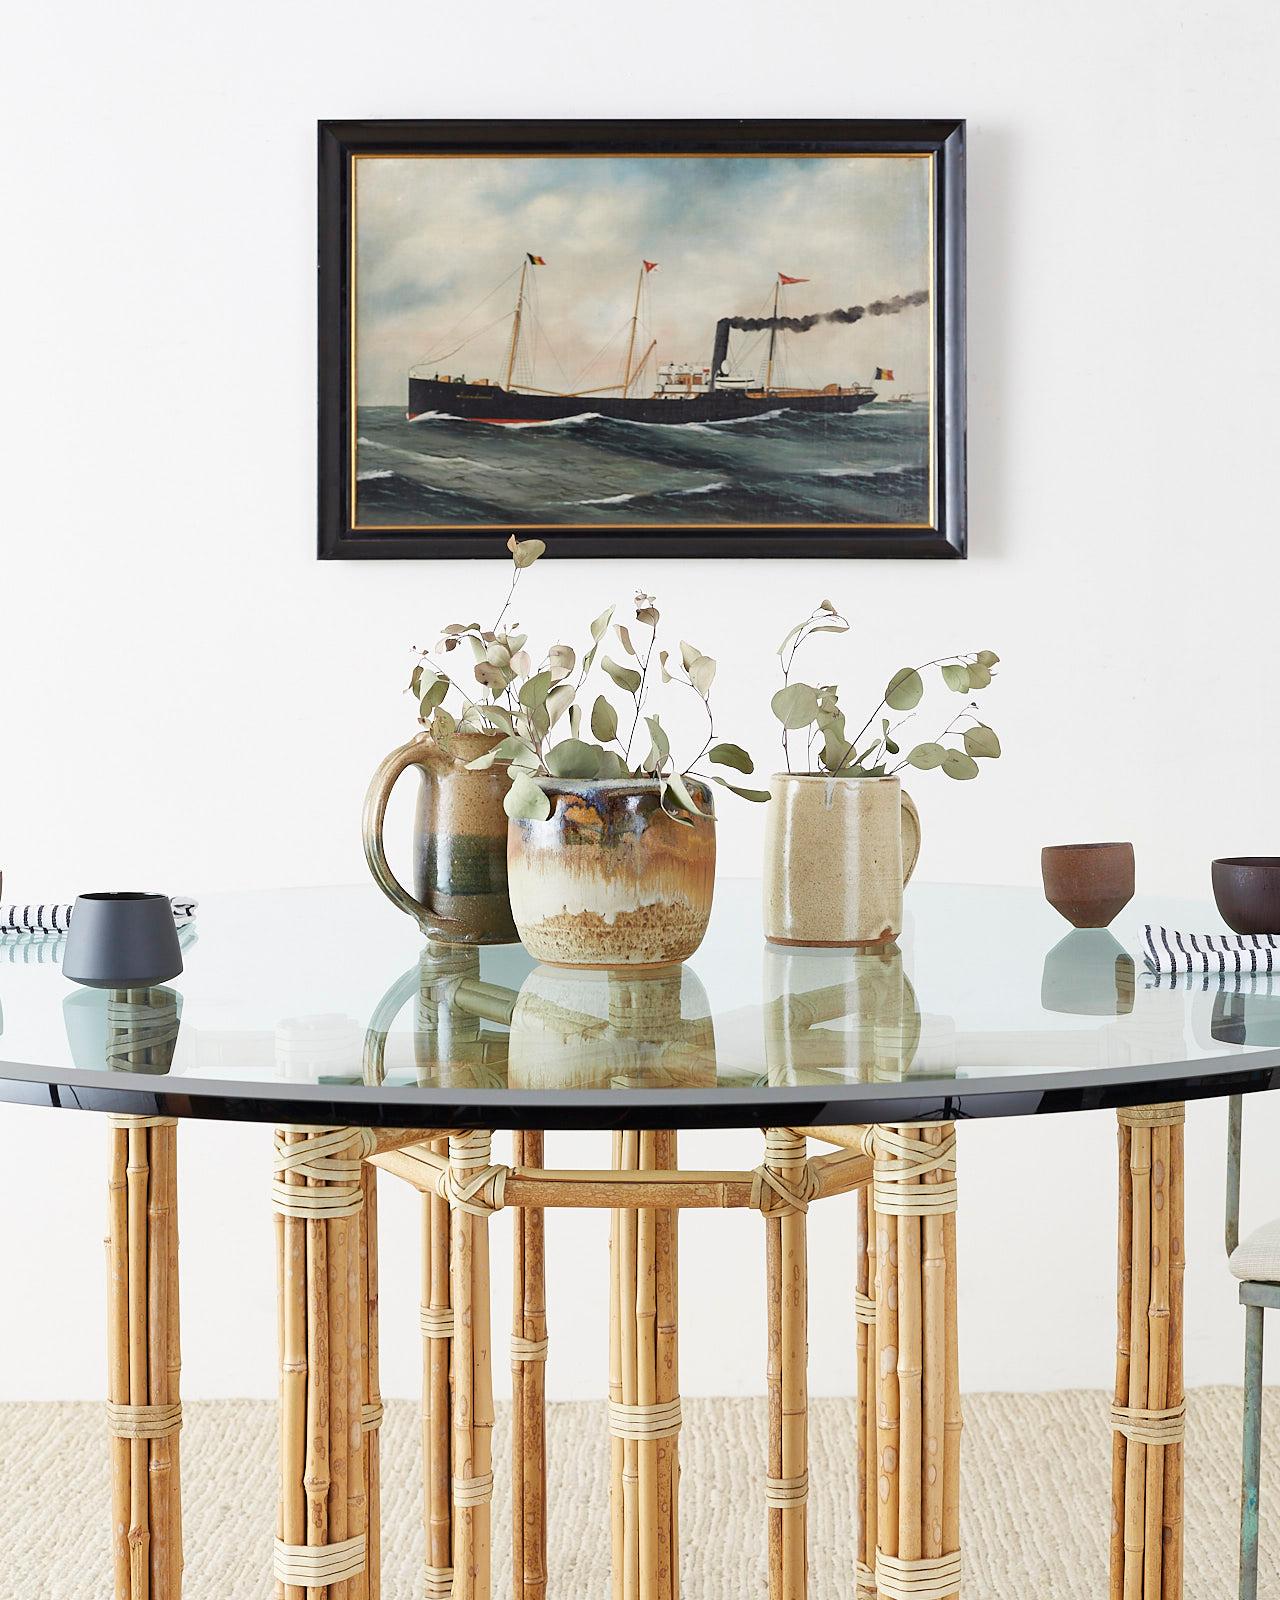 Genuine McGuire organic modern round dining table. Featuring an iron frame wrapped with bamboo rattan poles. The bamboo rattan has a light blonde tone and is lashed together with a cream colored leather rawhide strapping. The frame has a seven leg